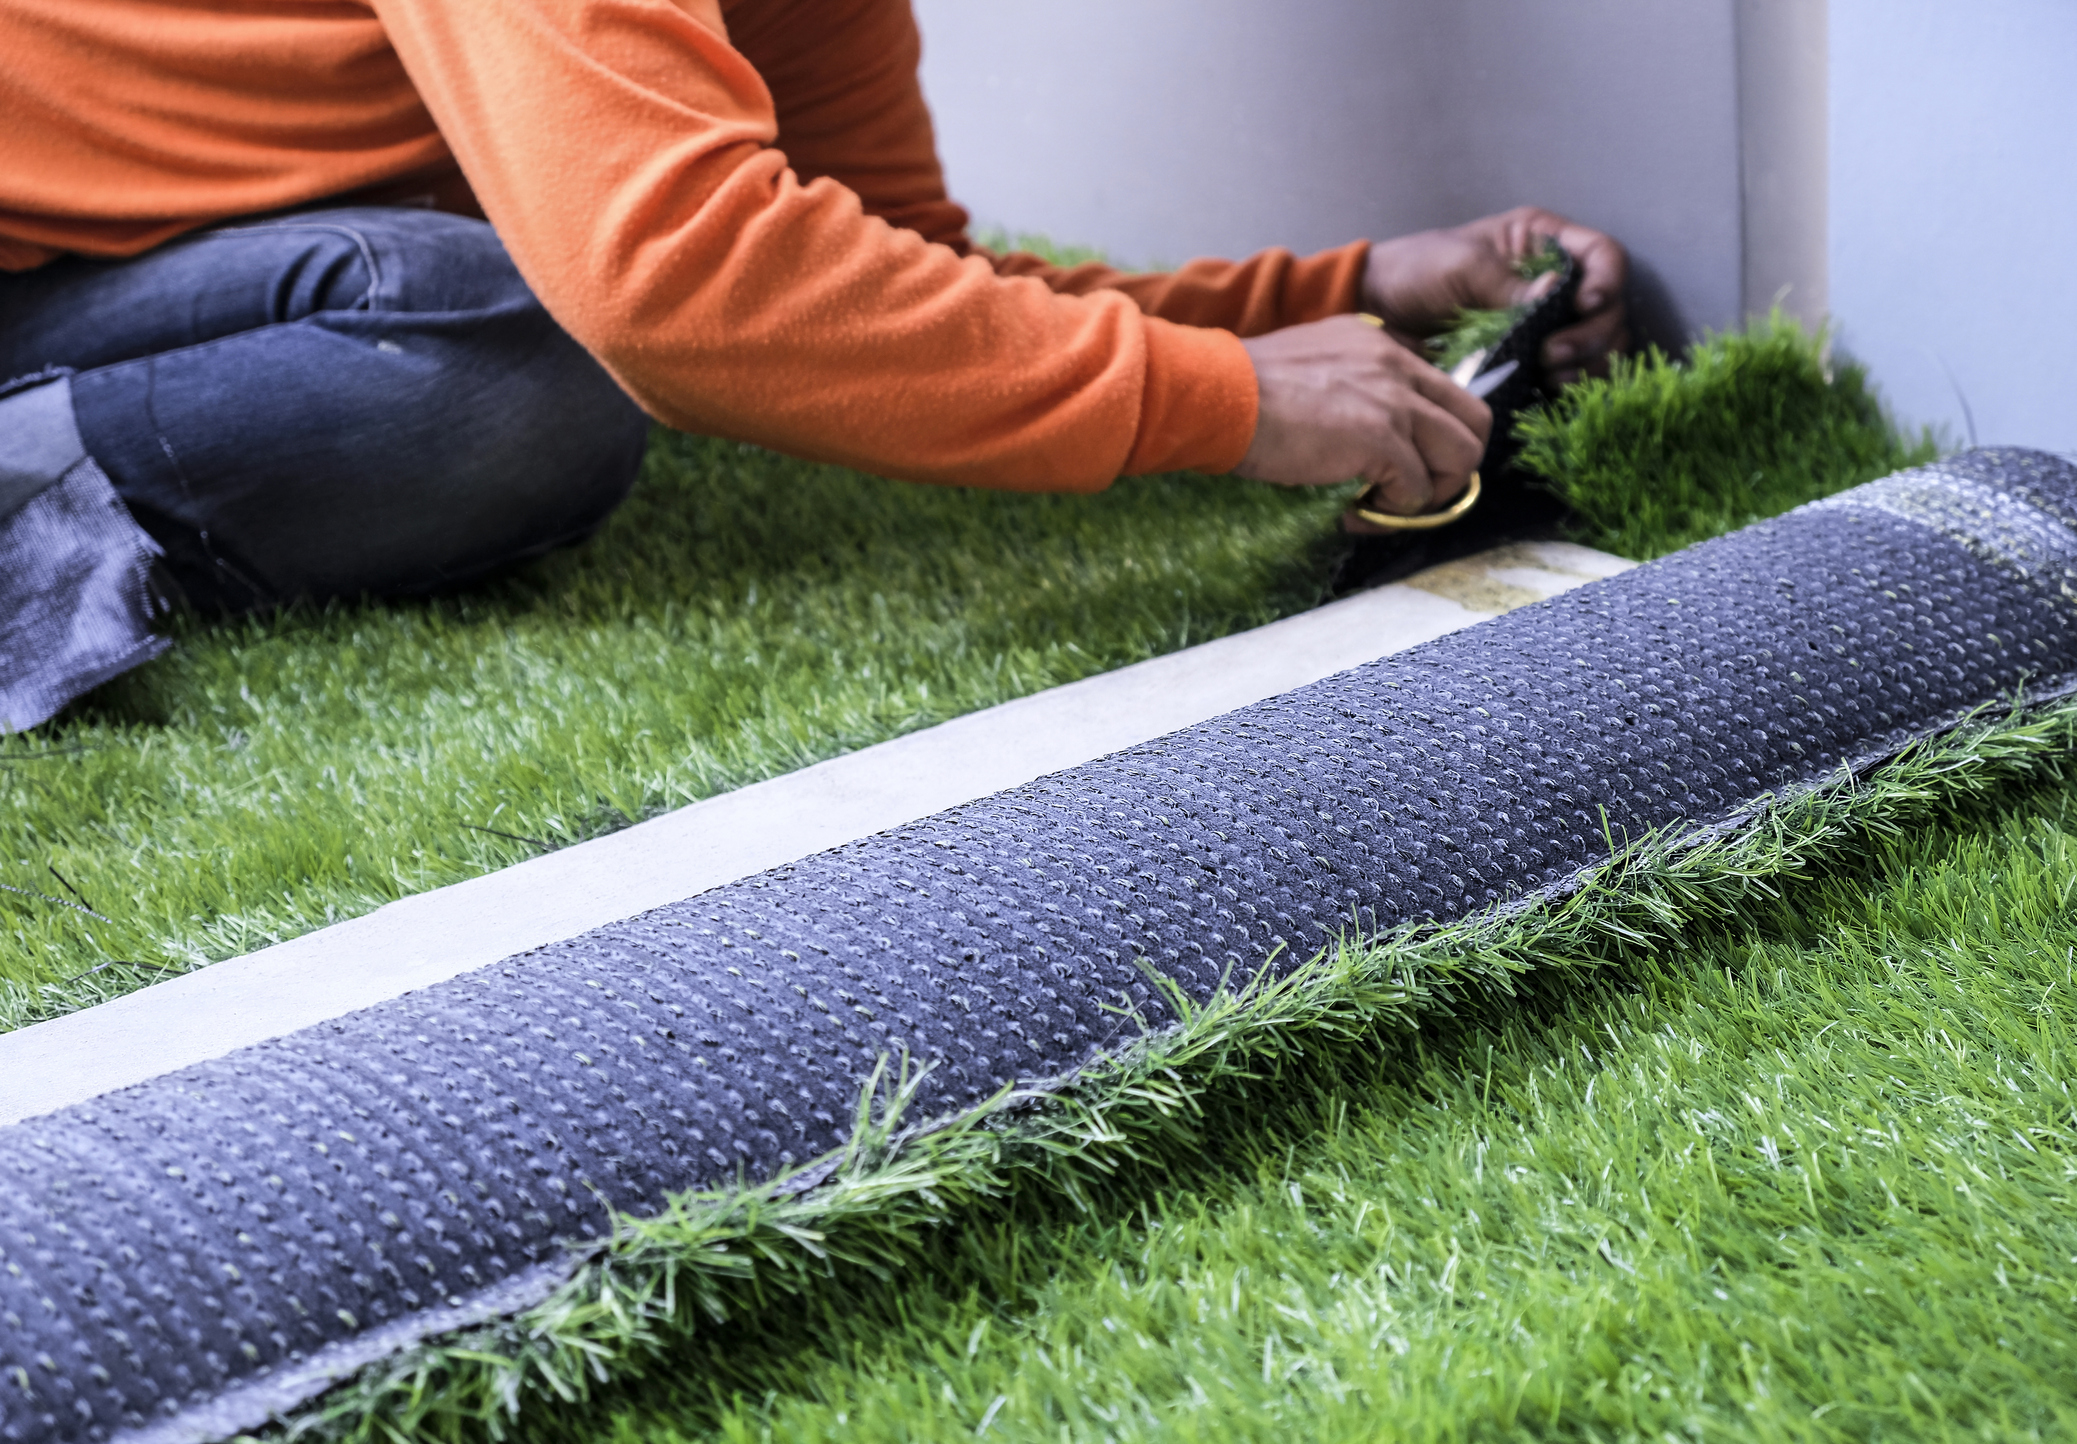 A person installing artificial turf